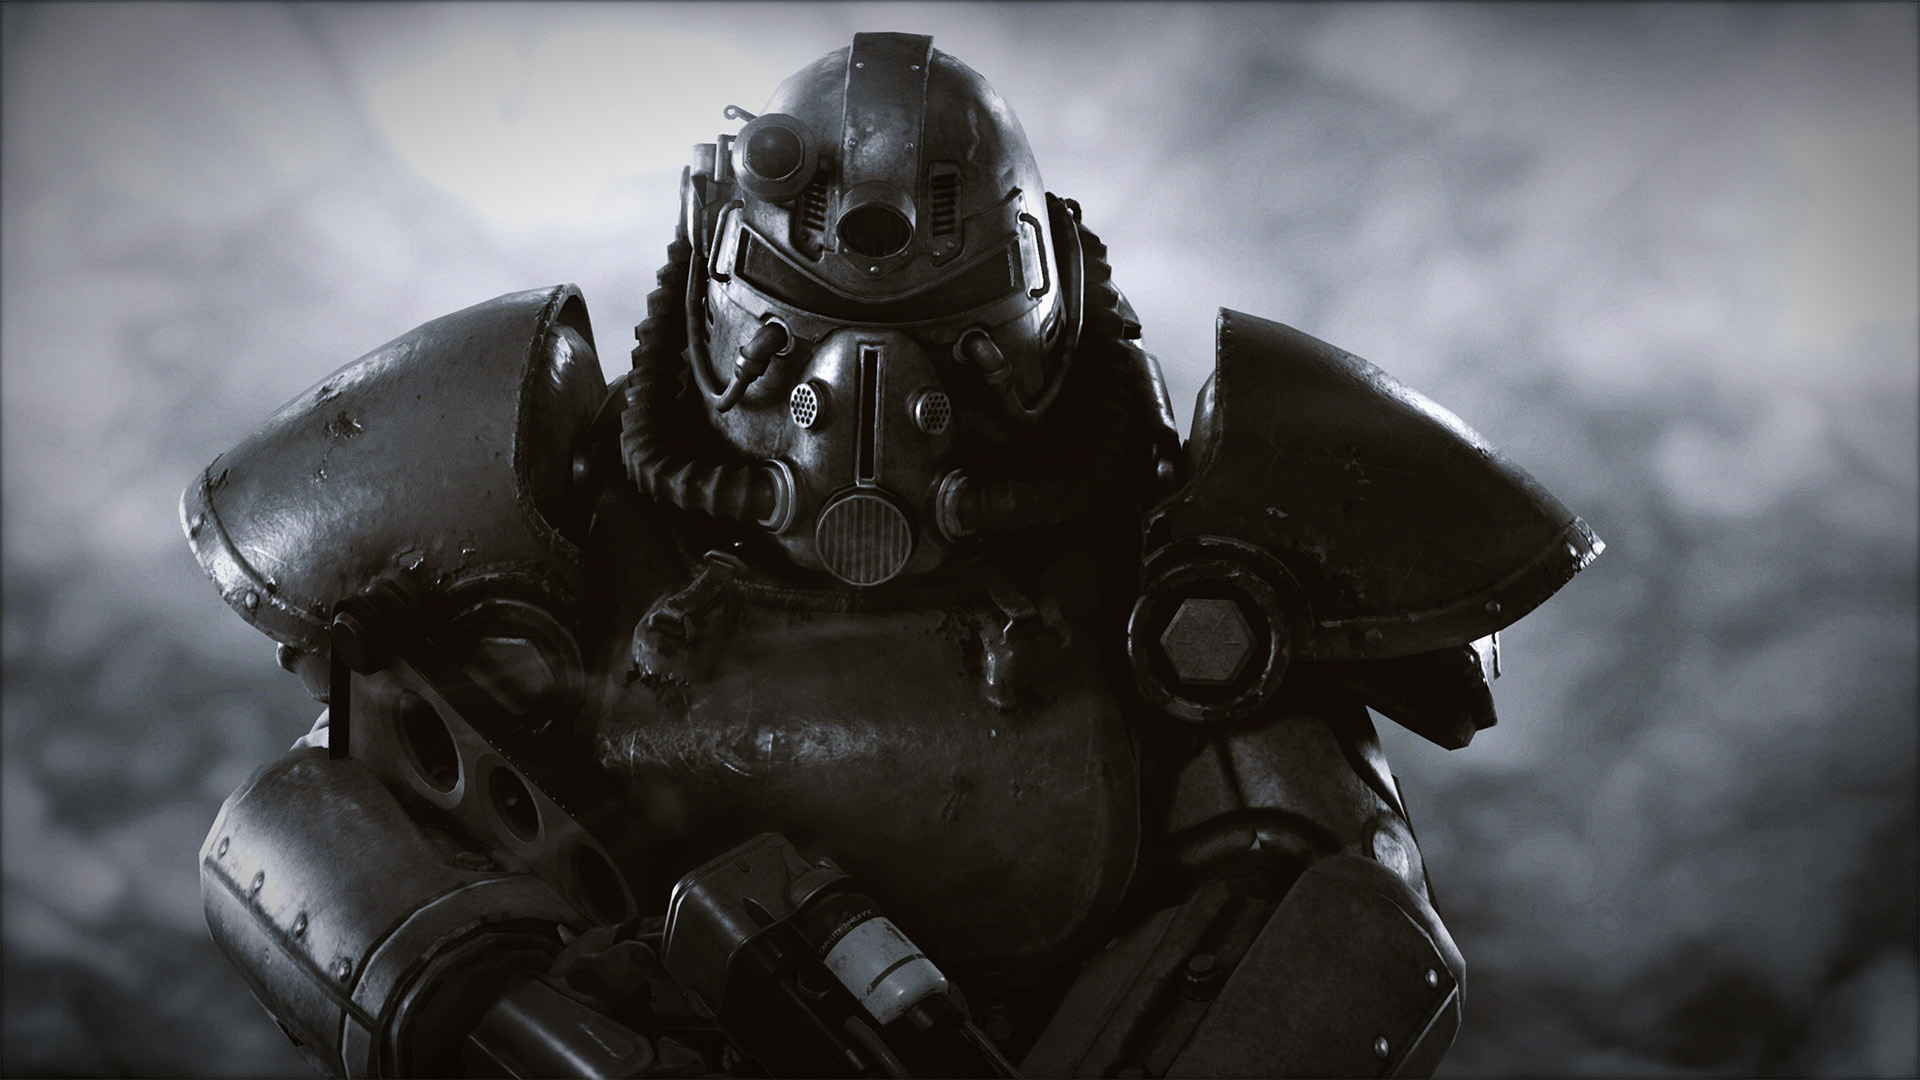 T 51b Power Armor Wallpaper From Fallout Gamepressure